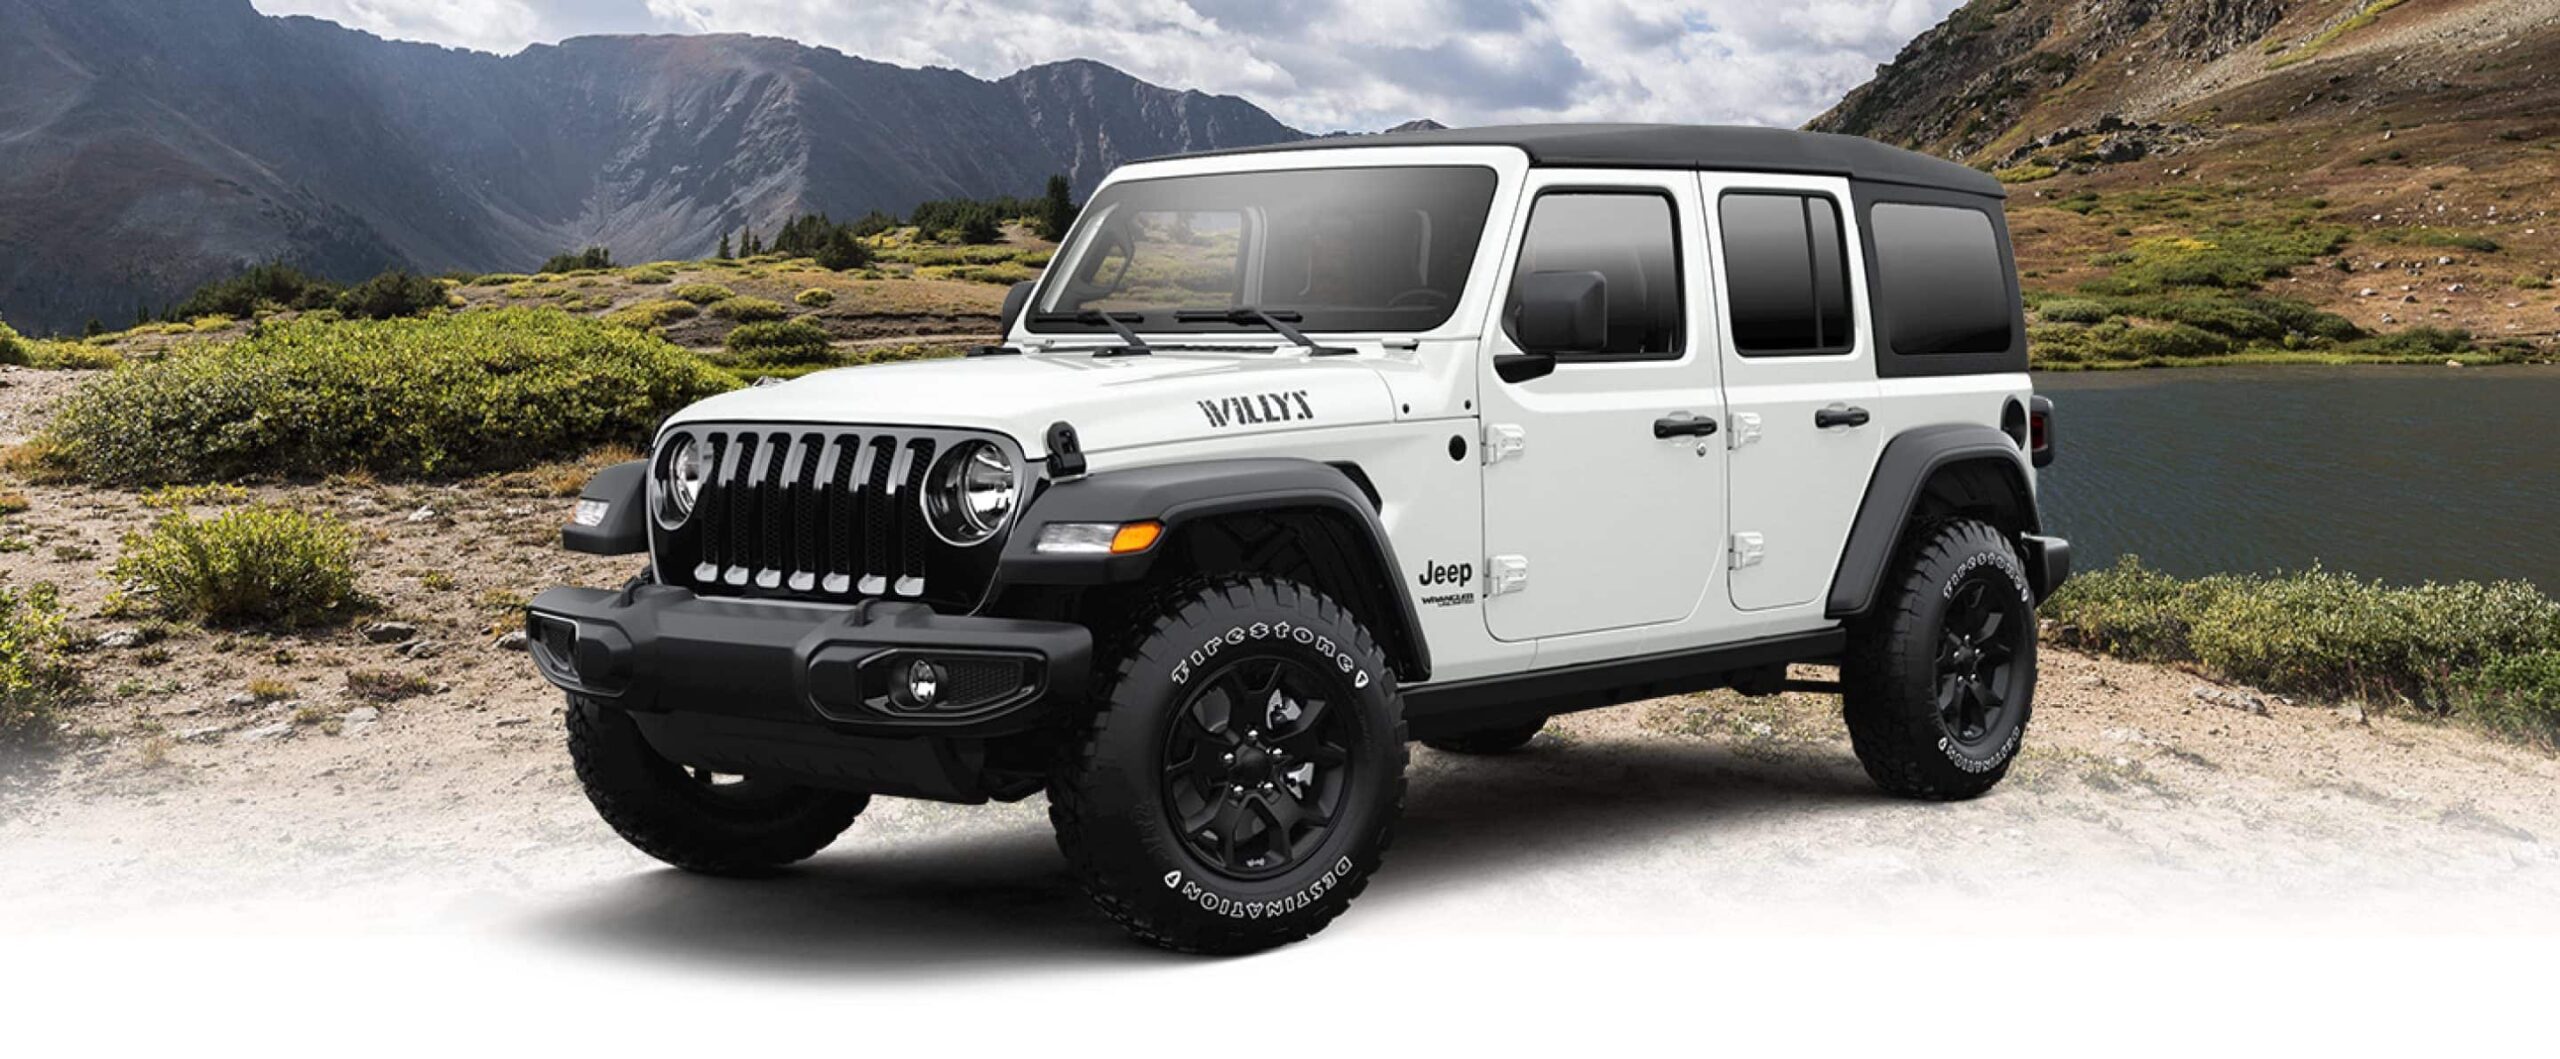 New Jeep Wrangler Willys Sport 2021: What Do You Not Get?